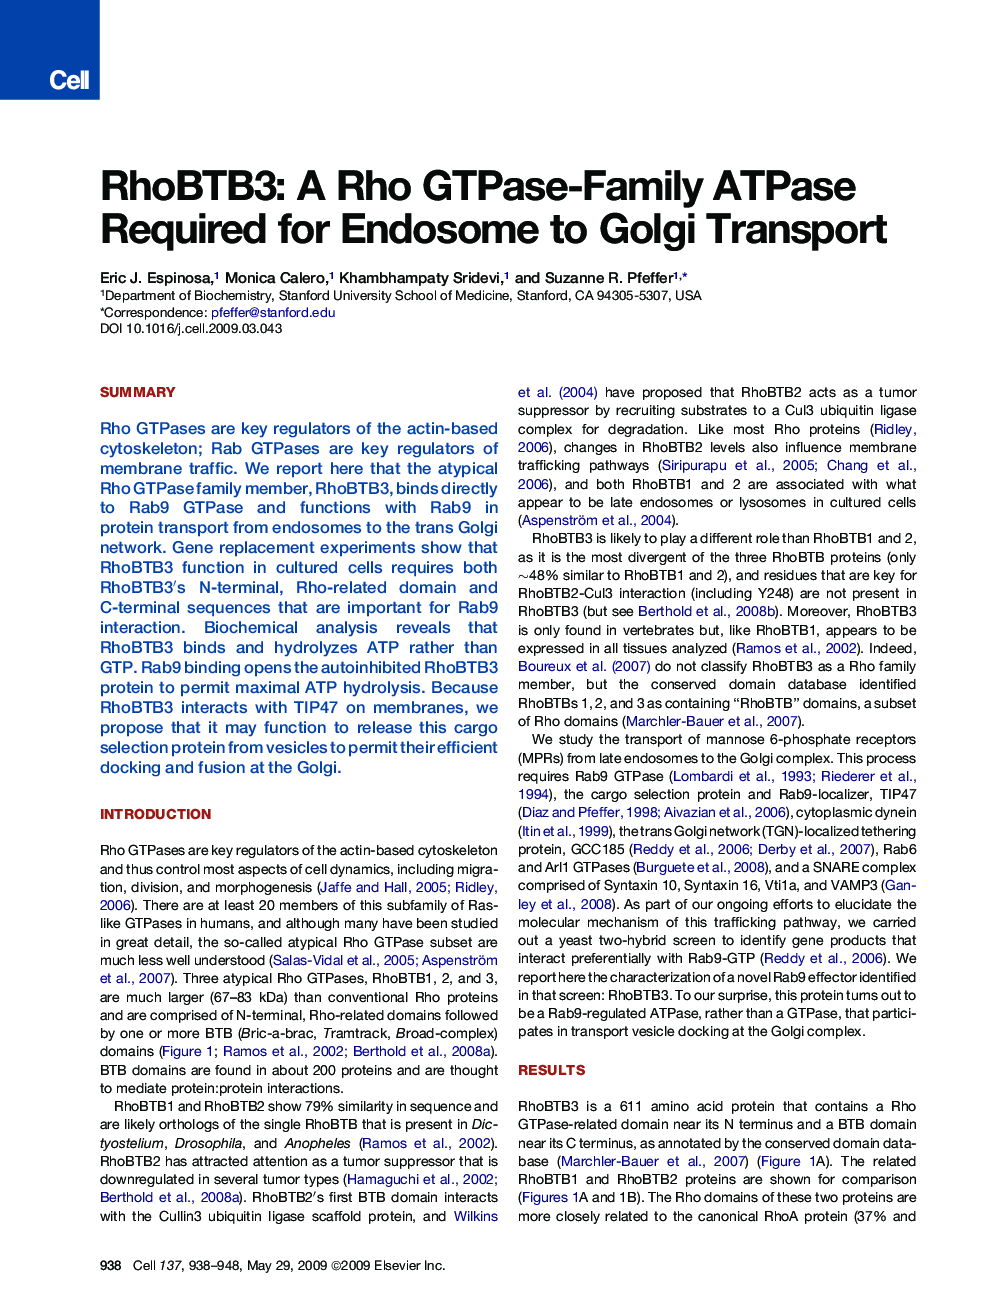 RhoBTB3: A Rho GTPase-Family ATPase Required for Endosome to Golgi Transport